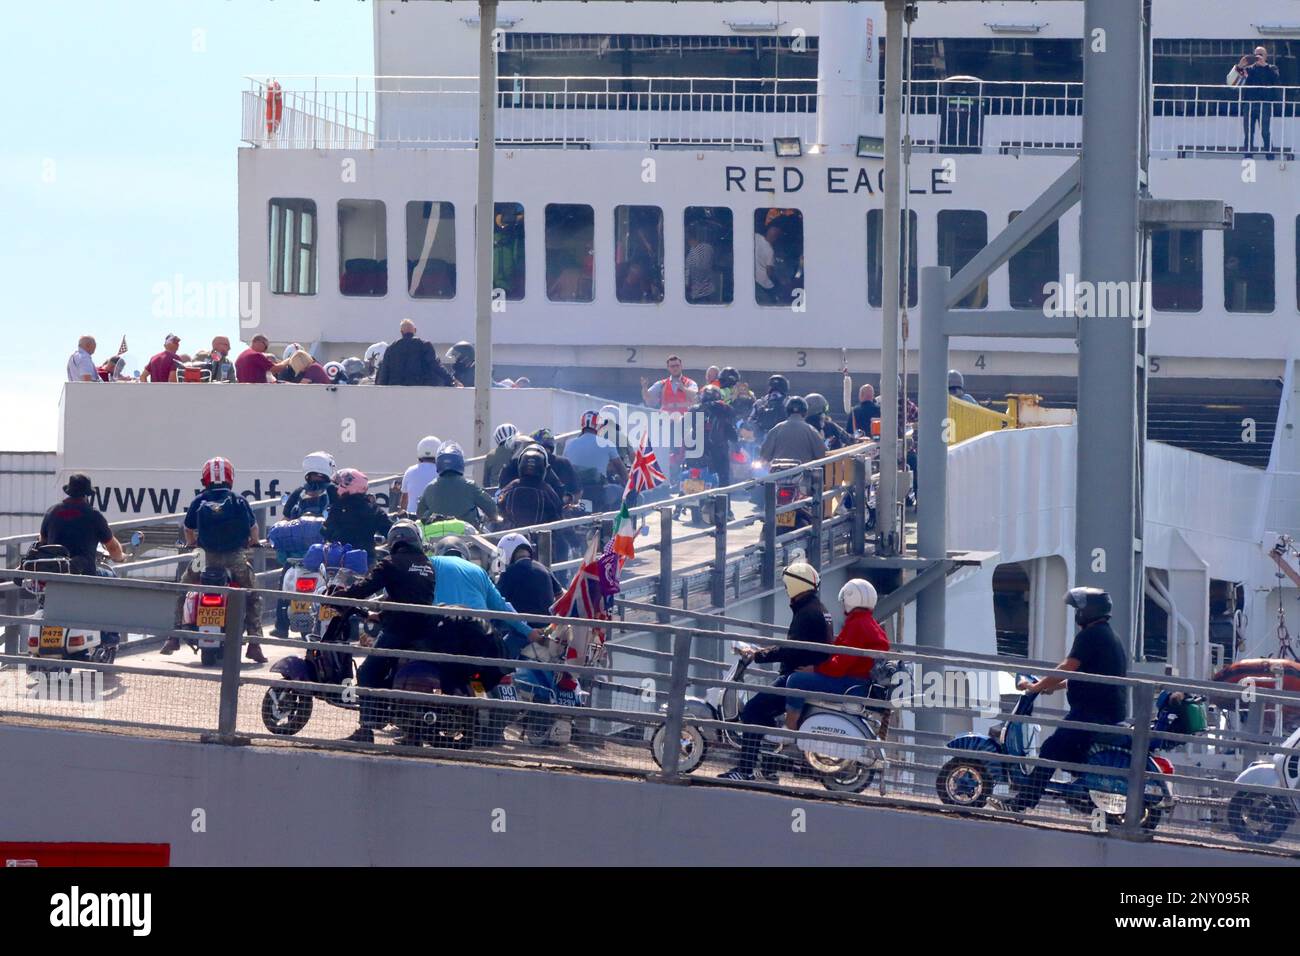 Vespas, Lambrettas, Royal Alloys, and replica classic scooters swarm upon the “Red Eagle” ferry, bound for the I-O-W scooter rally August 2022. Stock Photo